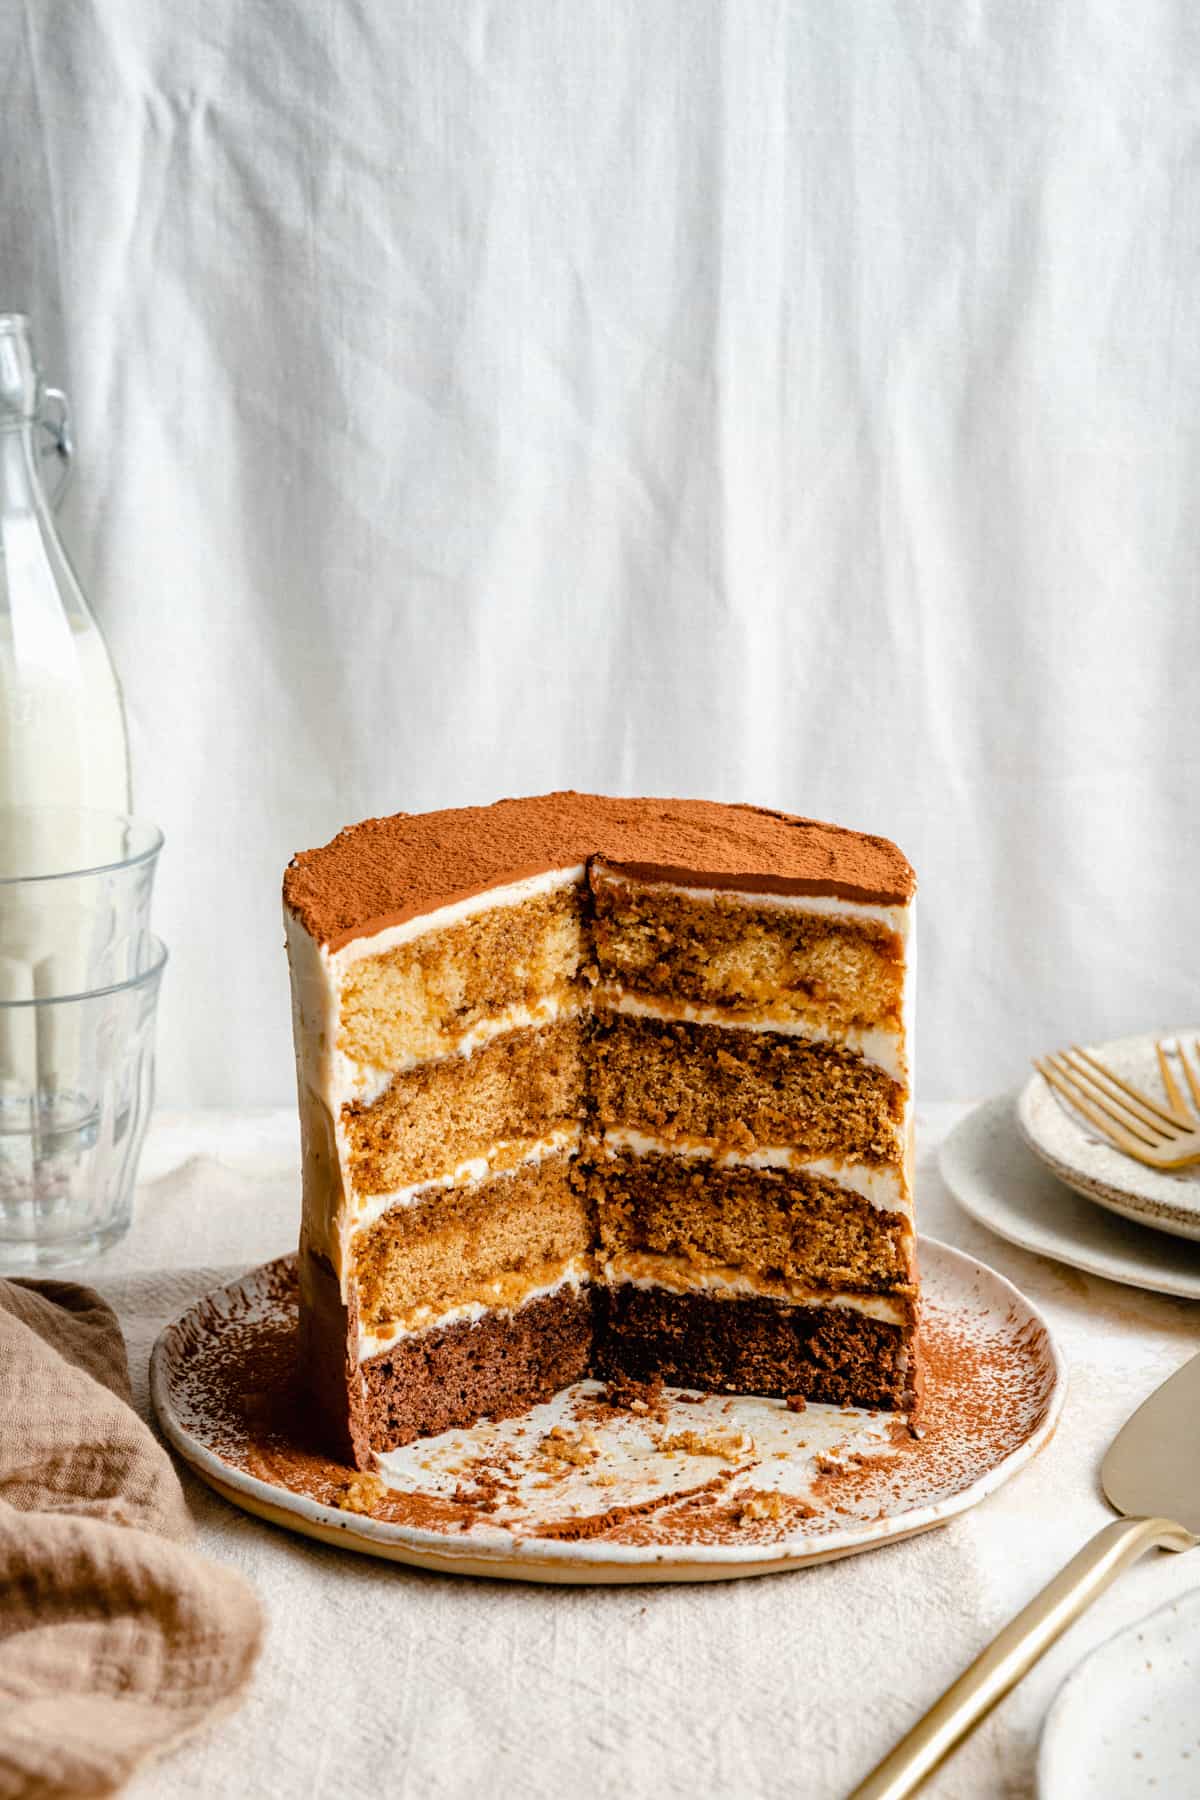 Tiramisu cake on a plate with a large wedge taken out showing the layers and insides. 